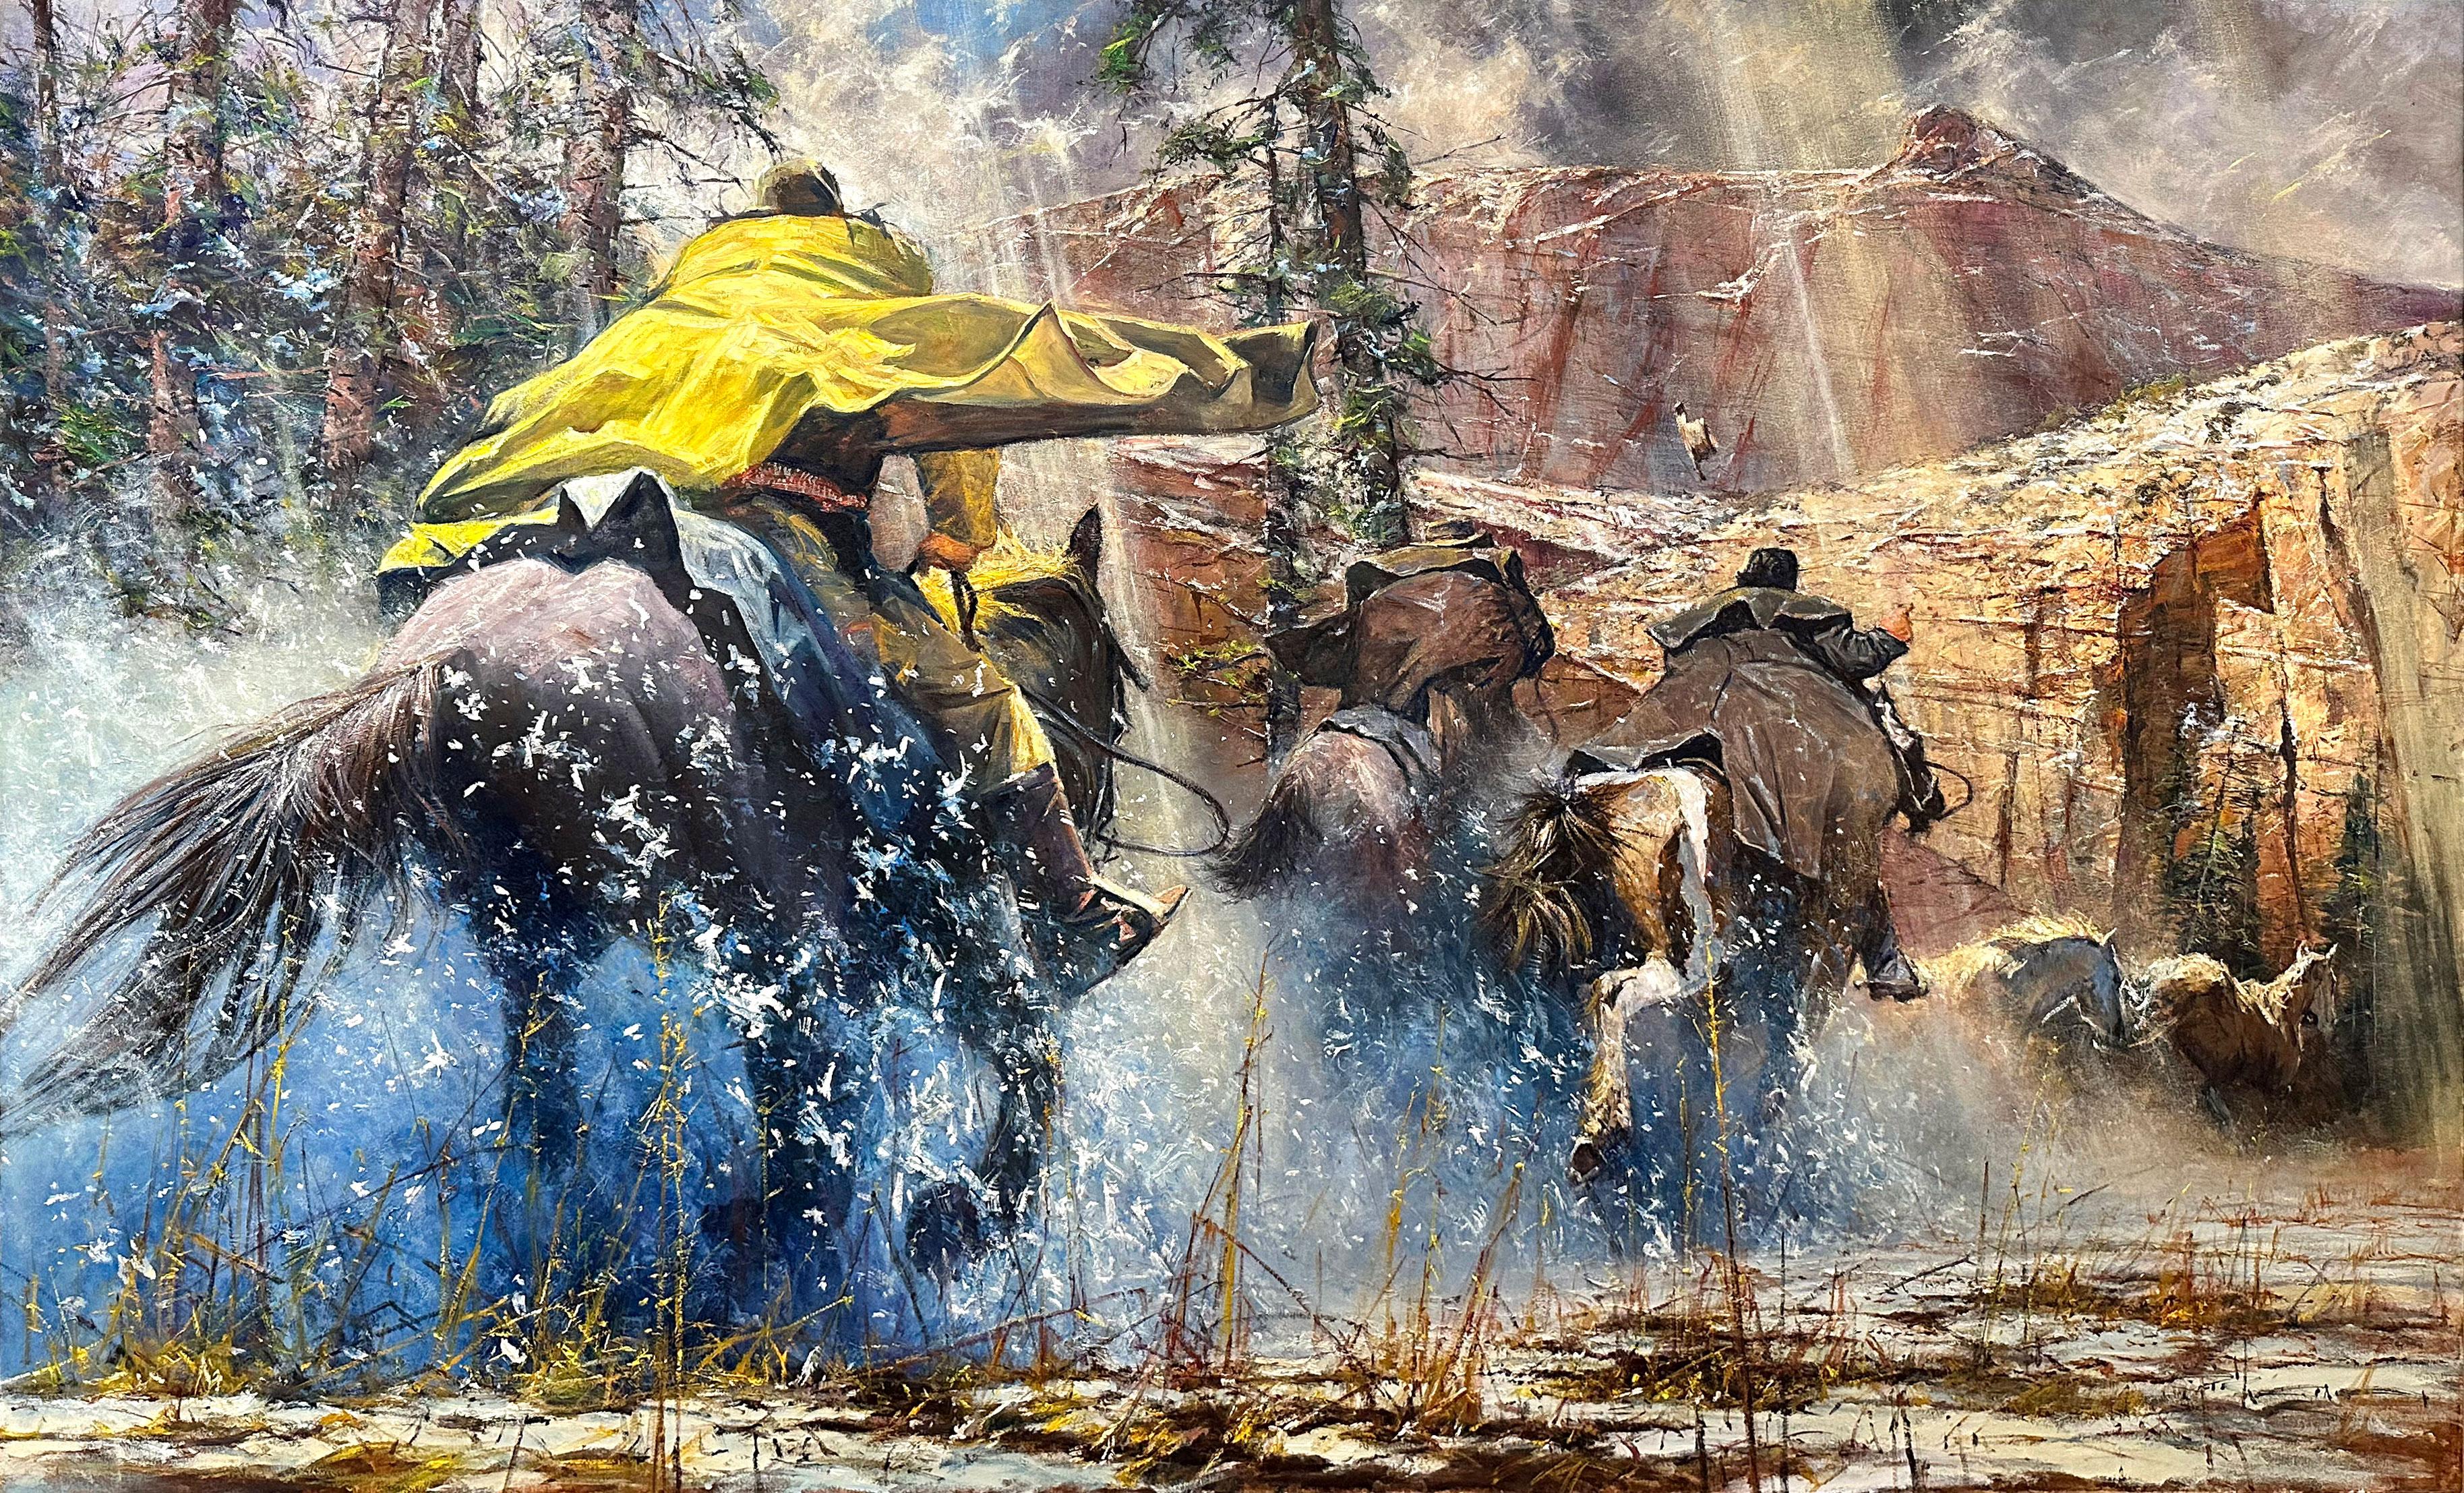 "Canyon Renegades" by Robert Hagan is an original oil on canvas and measures 62x96.  
In this large original painting by Robert Hagan, three cowboys on horseback run through the canyon mountains kicking up dust trying to reign in runaway stallions.